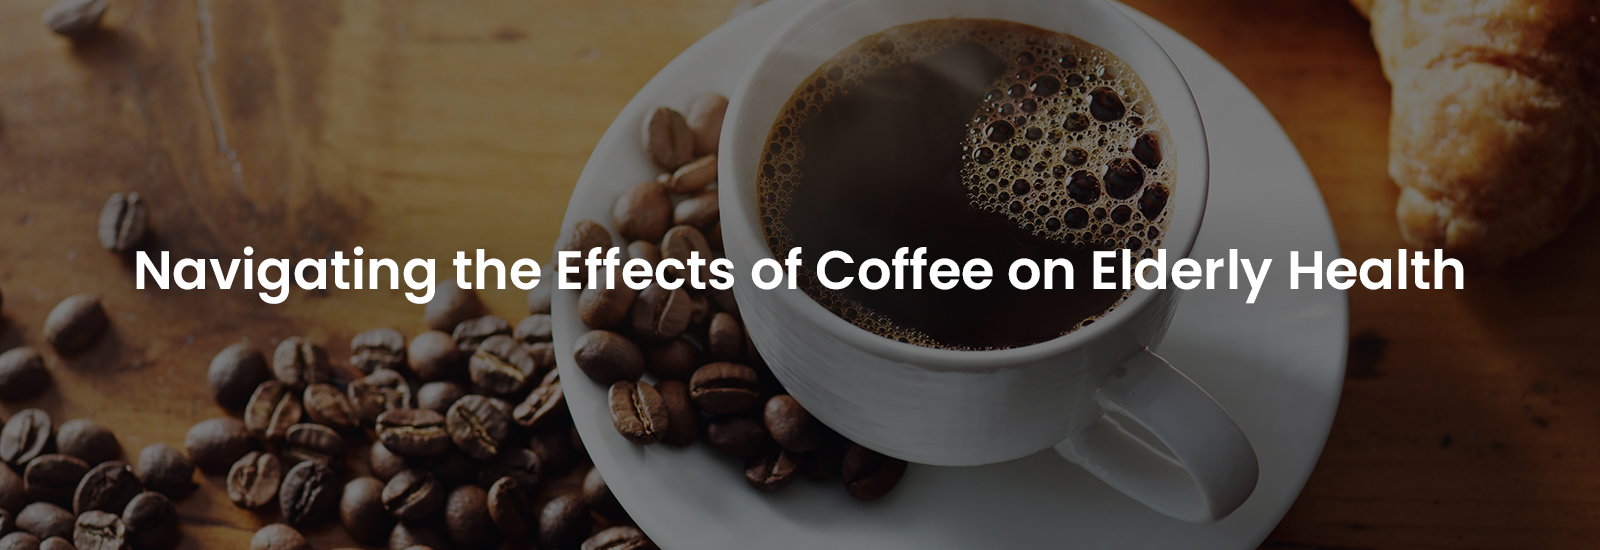 Navigating the Effects of Coffee on Elderly Health | Banner Image